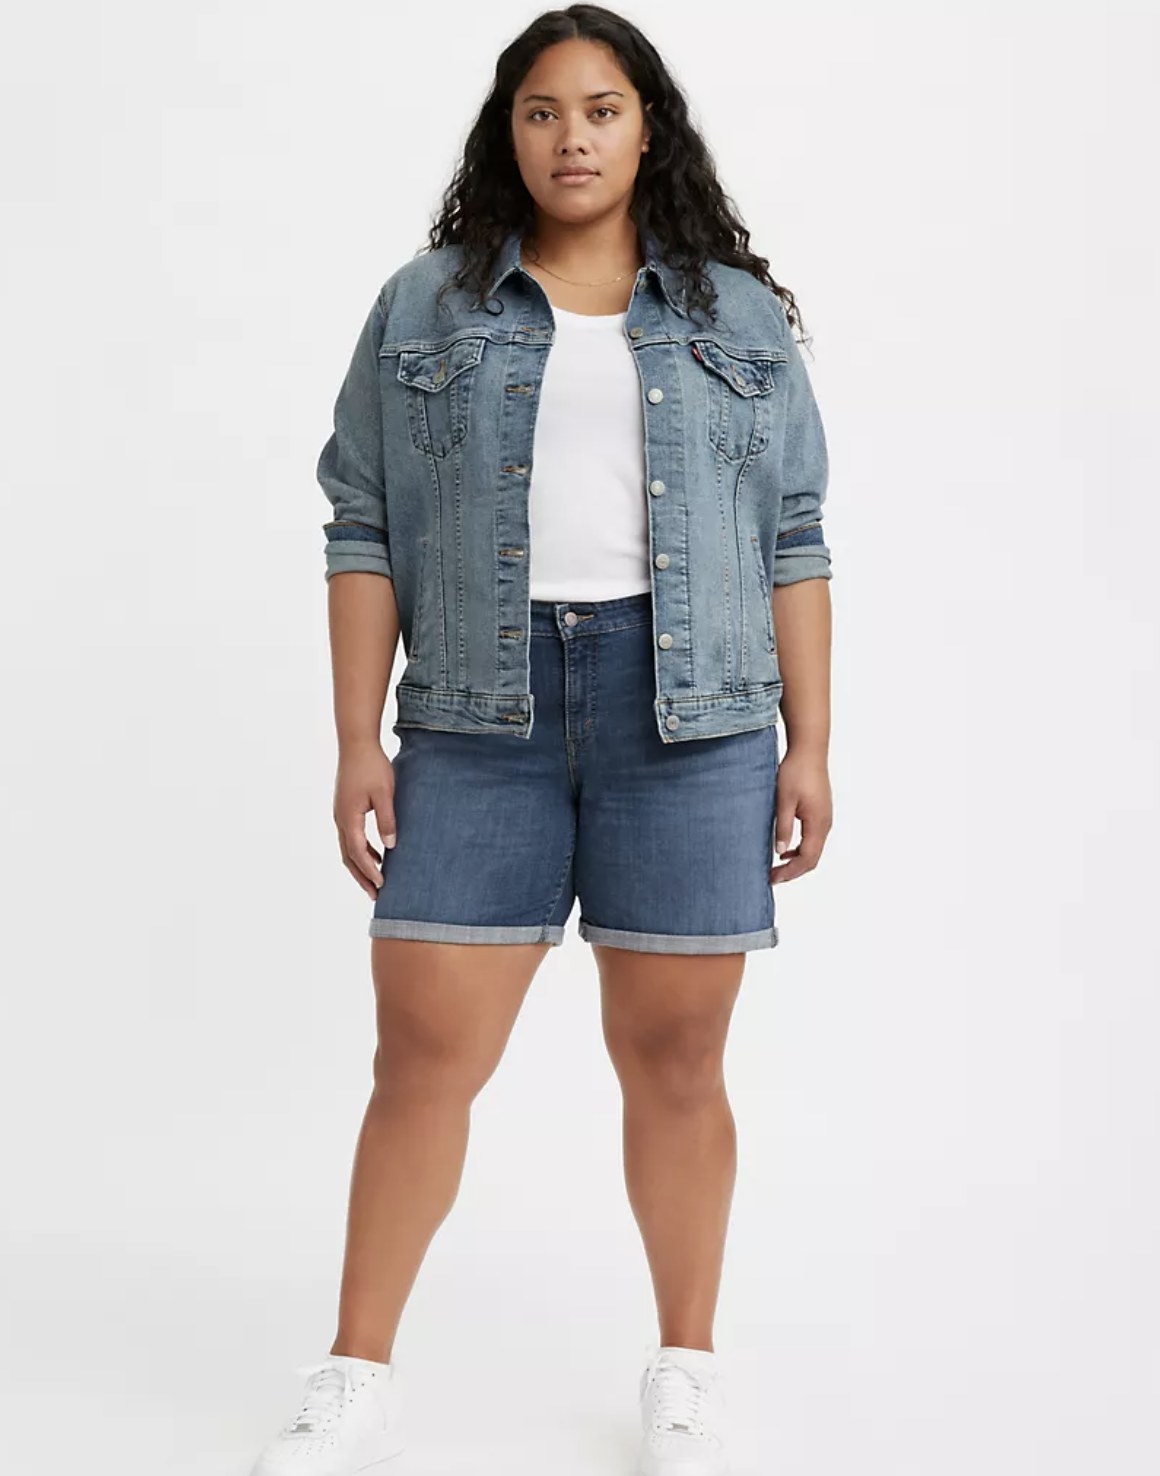 Model is wearing a white top, denim jacket, and denim shorts